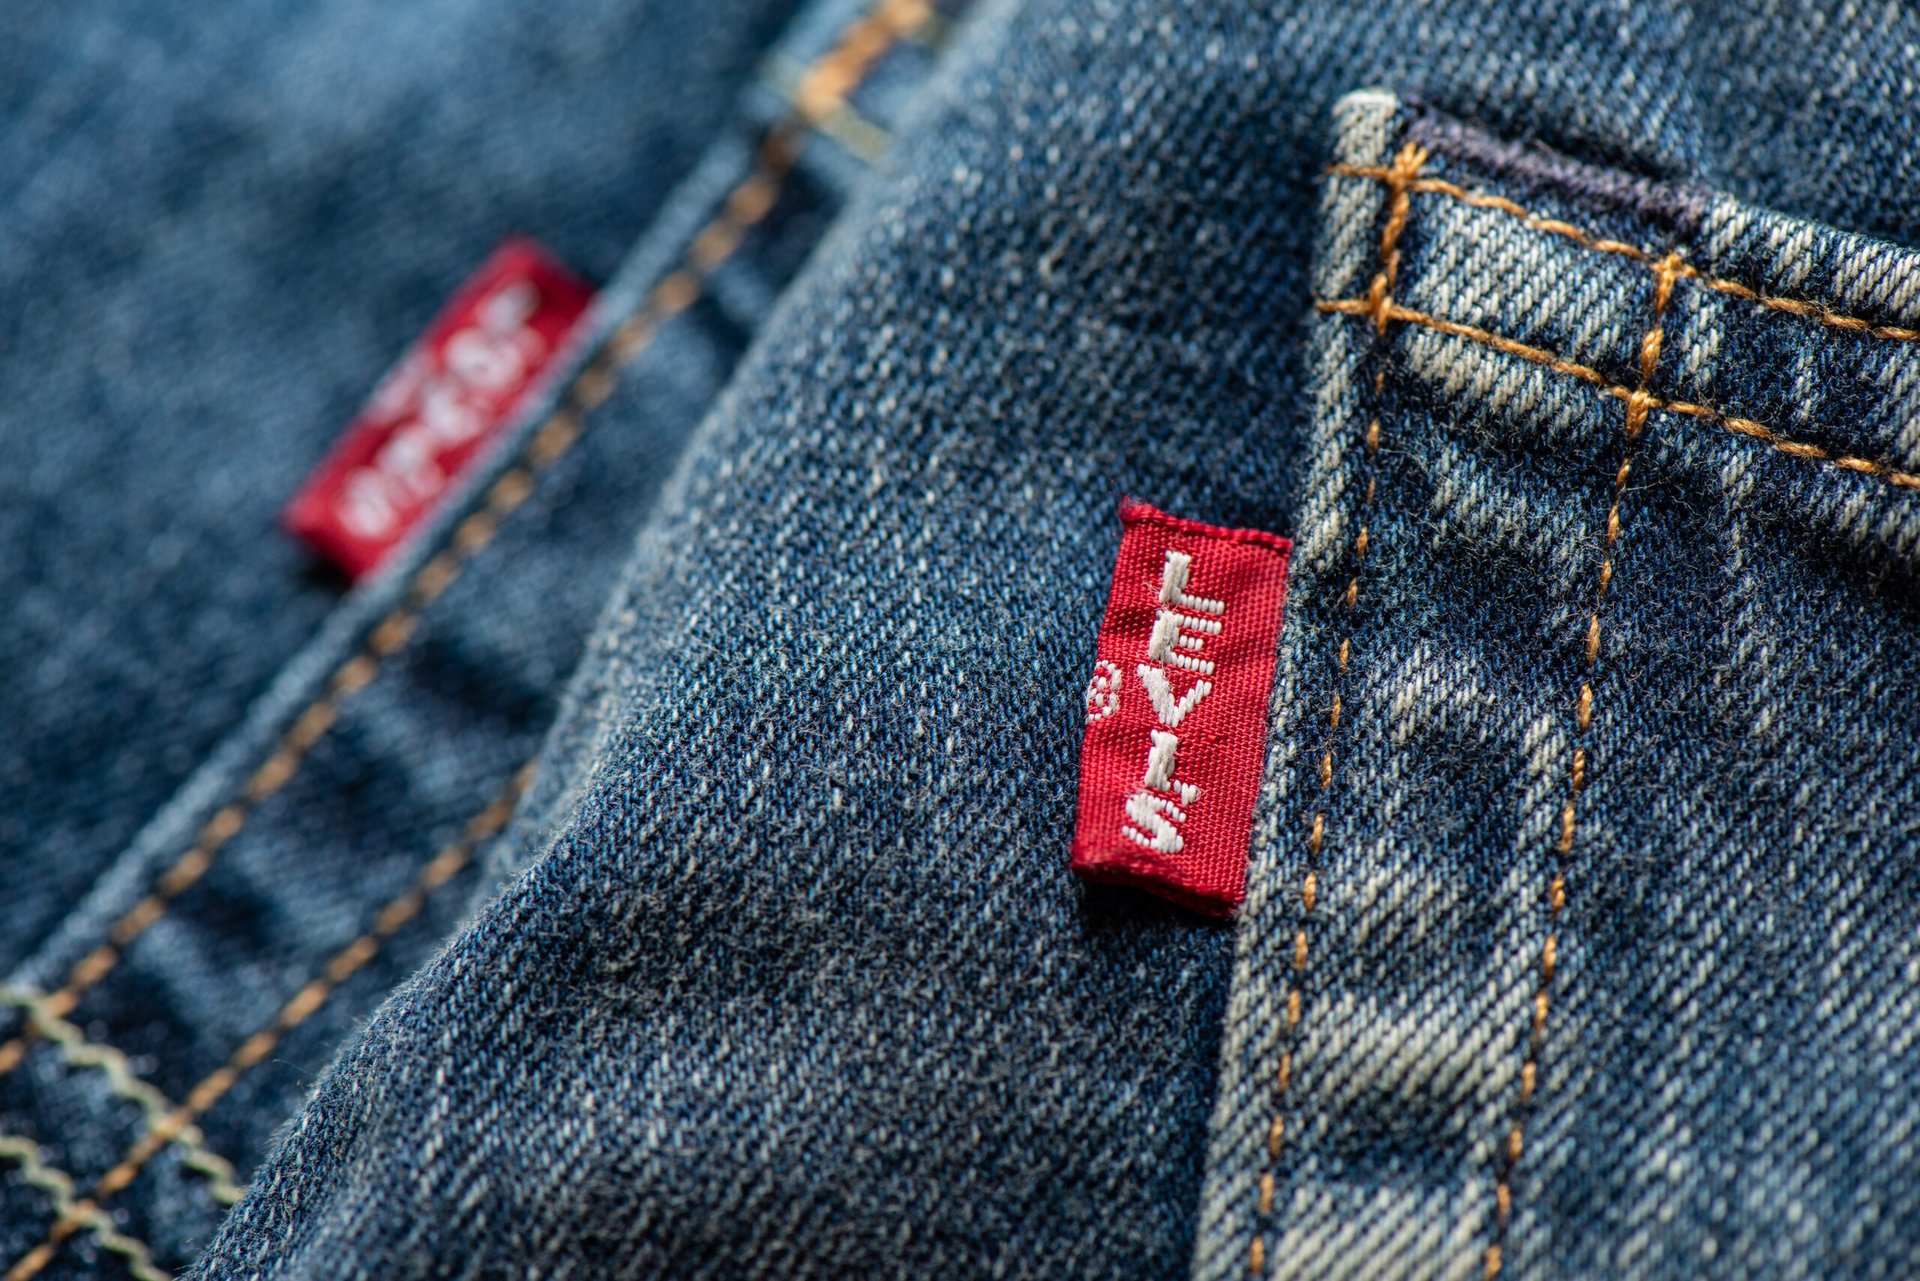 Hands On, Levi's Vintage Clothing